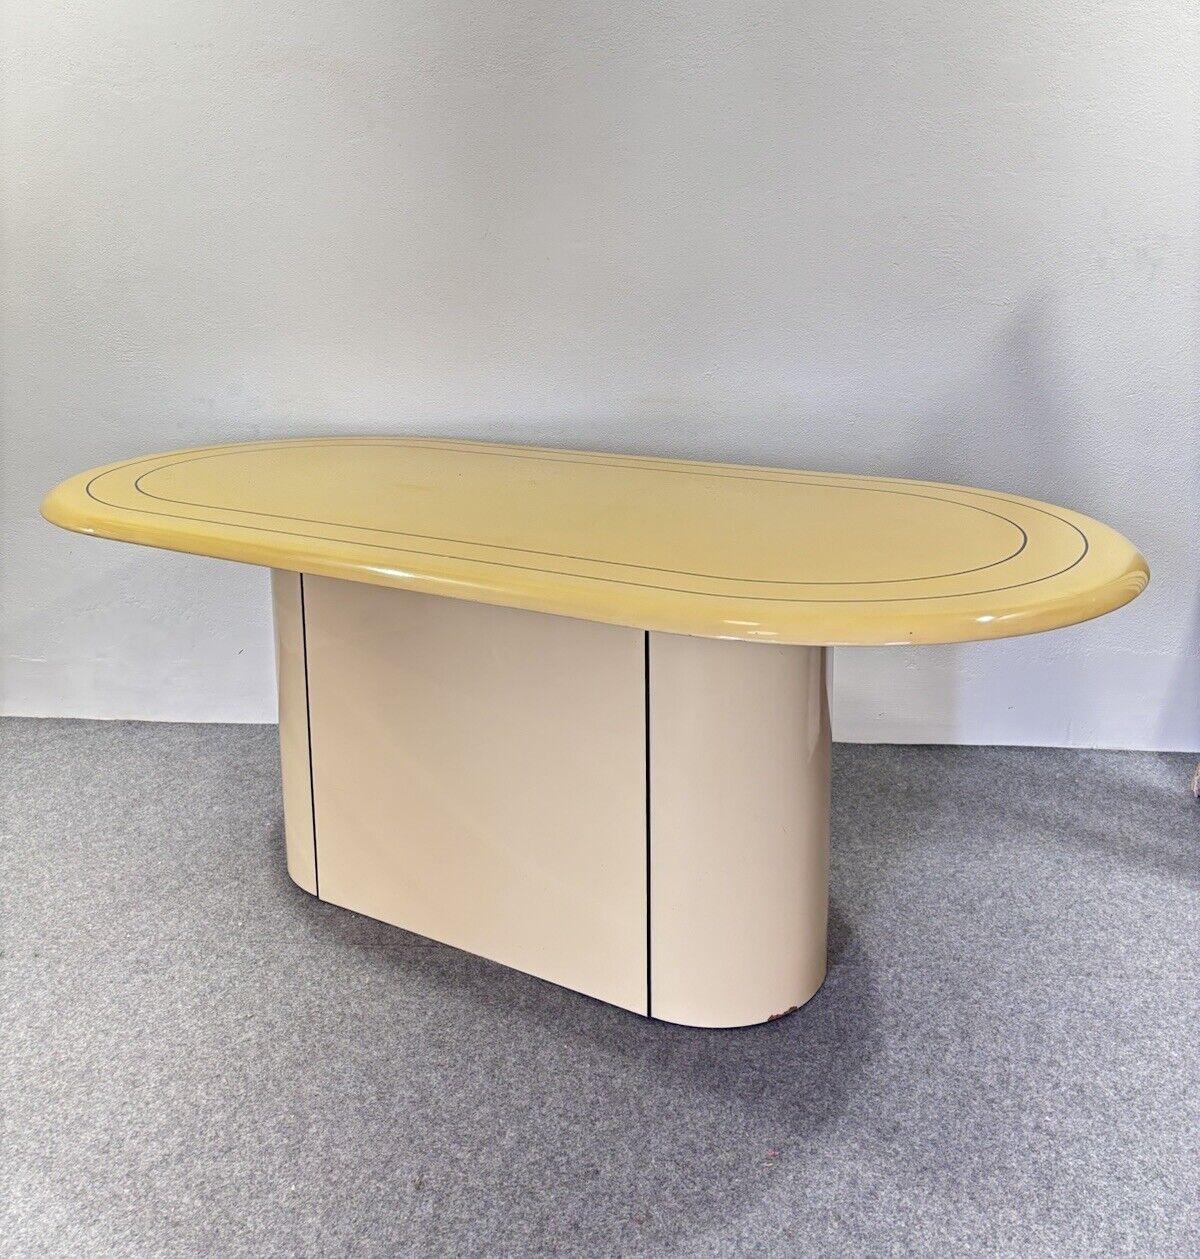 Pierre Cardin Style Dining Table Wooden Modern Design 1970s.

All-wood frame lacquered in cream color with black trim.

The item is in excellent conservative condition, there is no major structural aesthetic defect to report, only slight and obvious